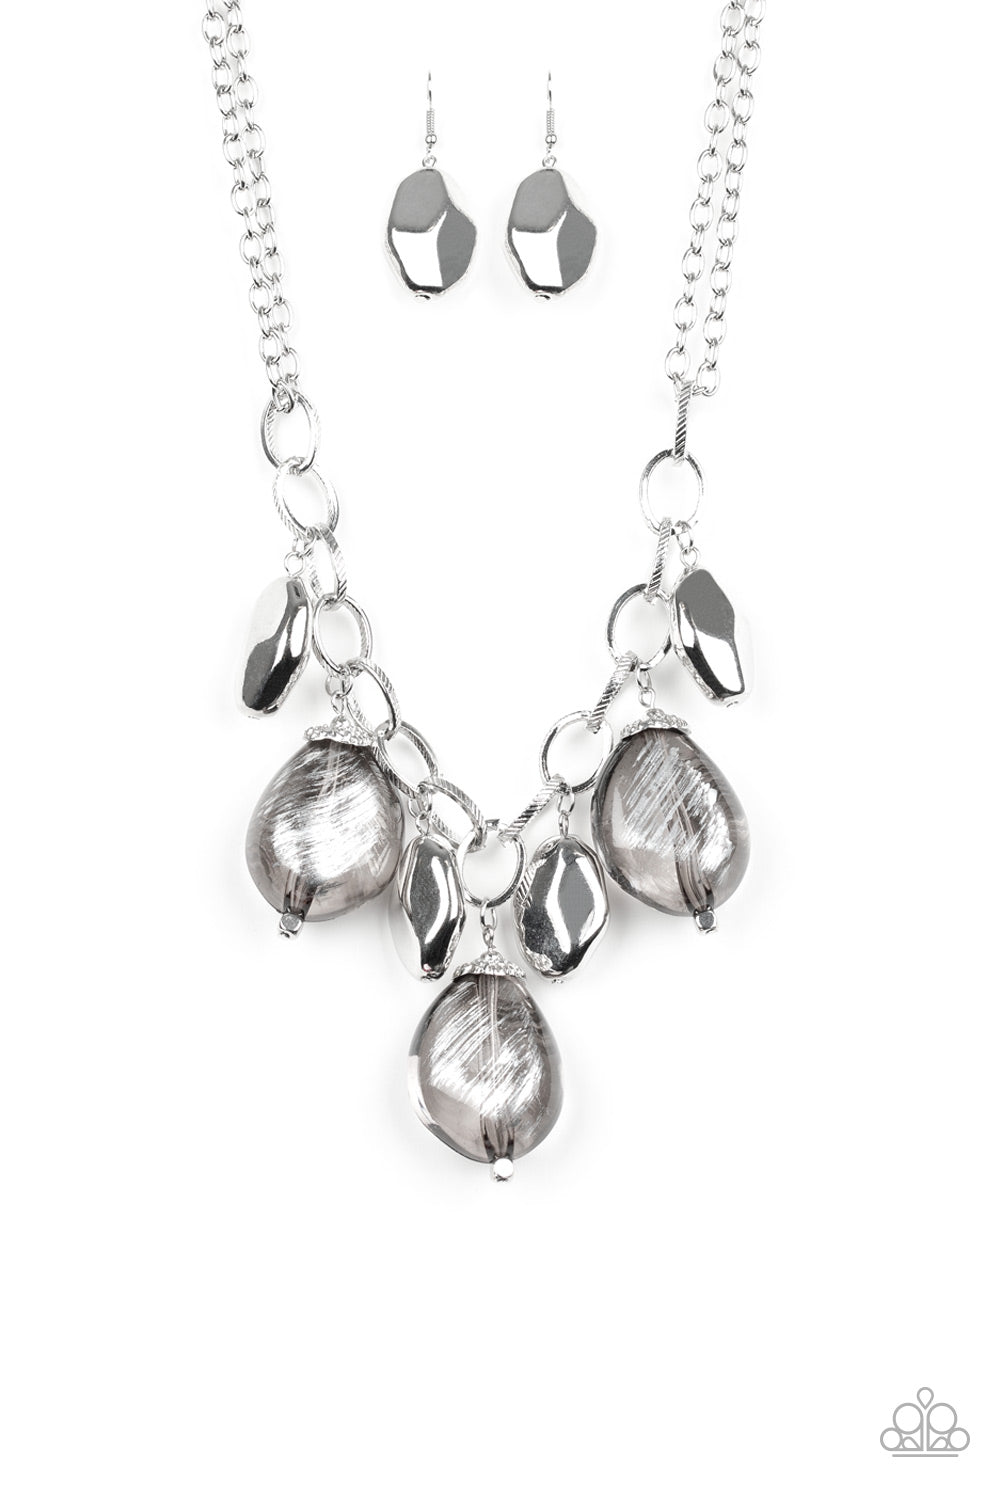 Looking Glass Glamorous Necklace - Silver